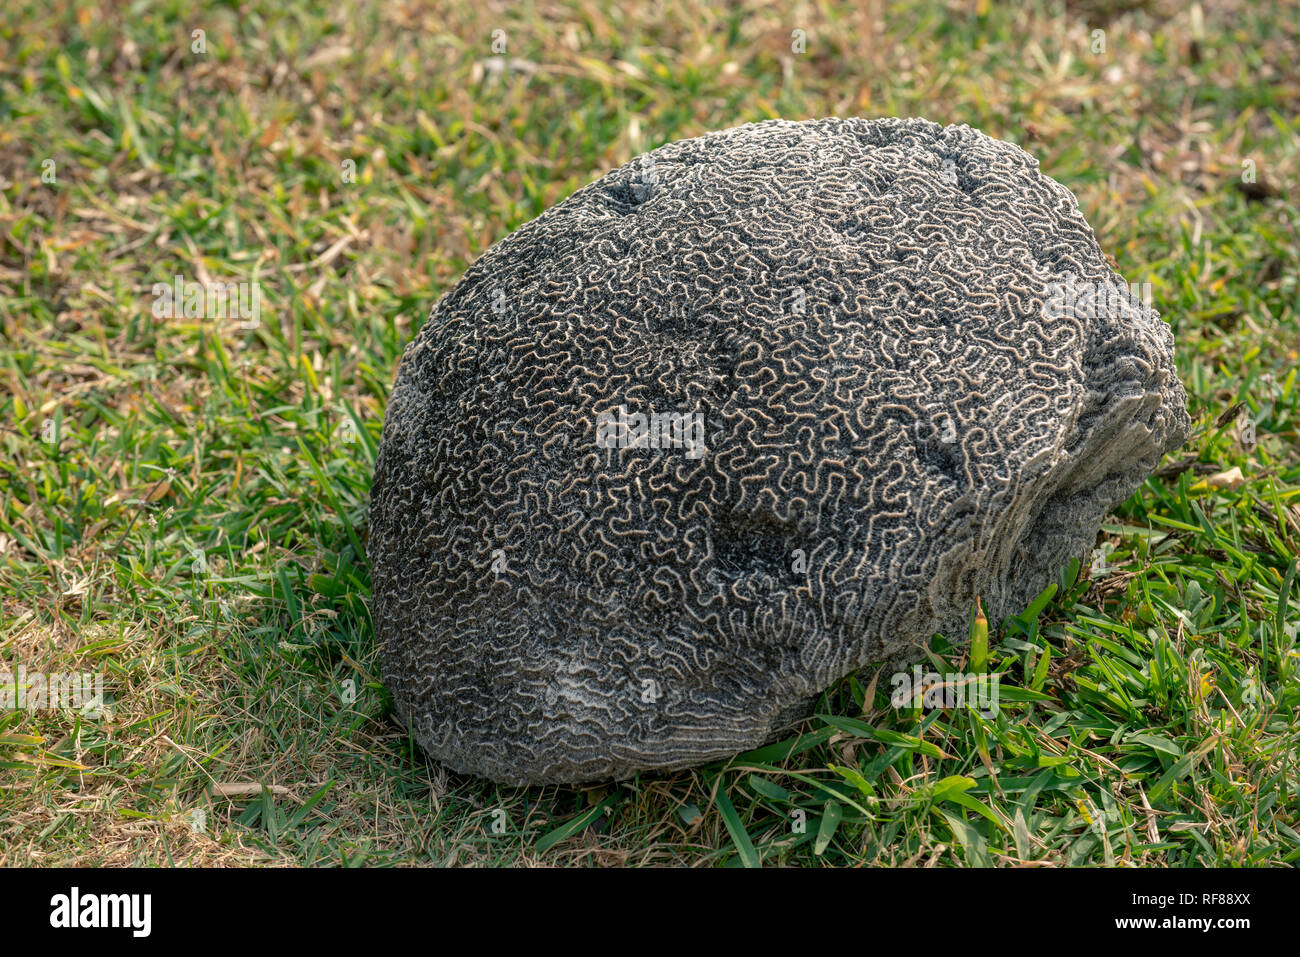 Brain coral, stony coral, scleractinia, lying in the grass Stock Photo